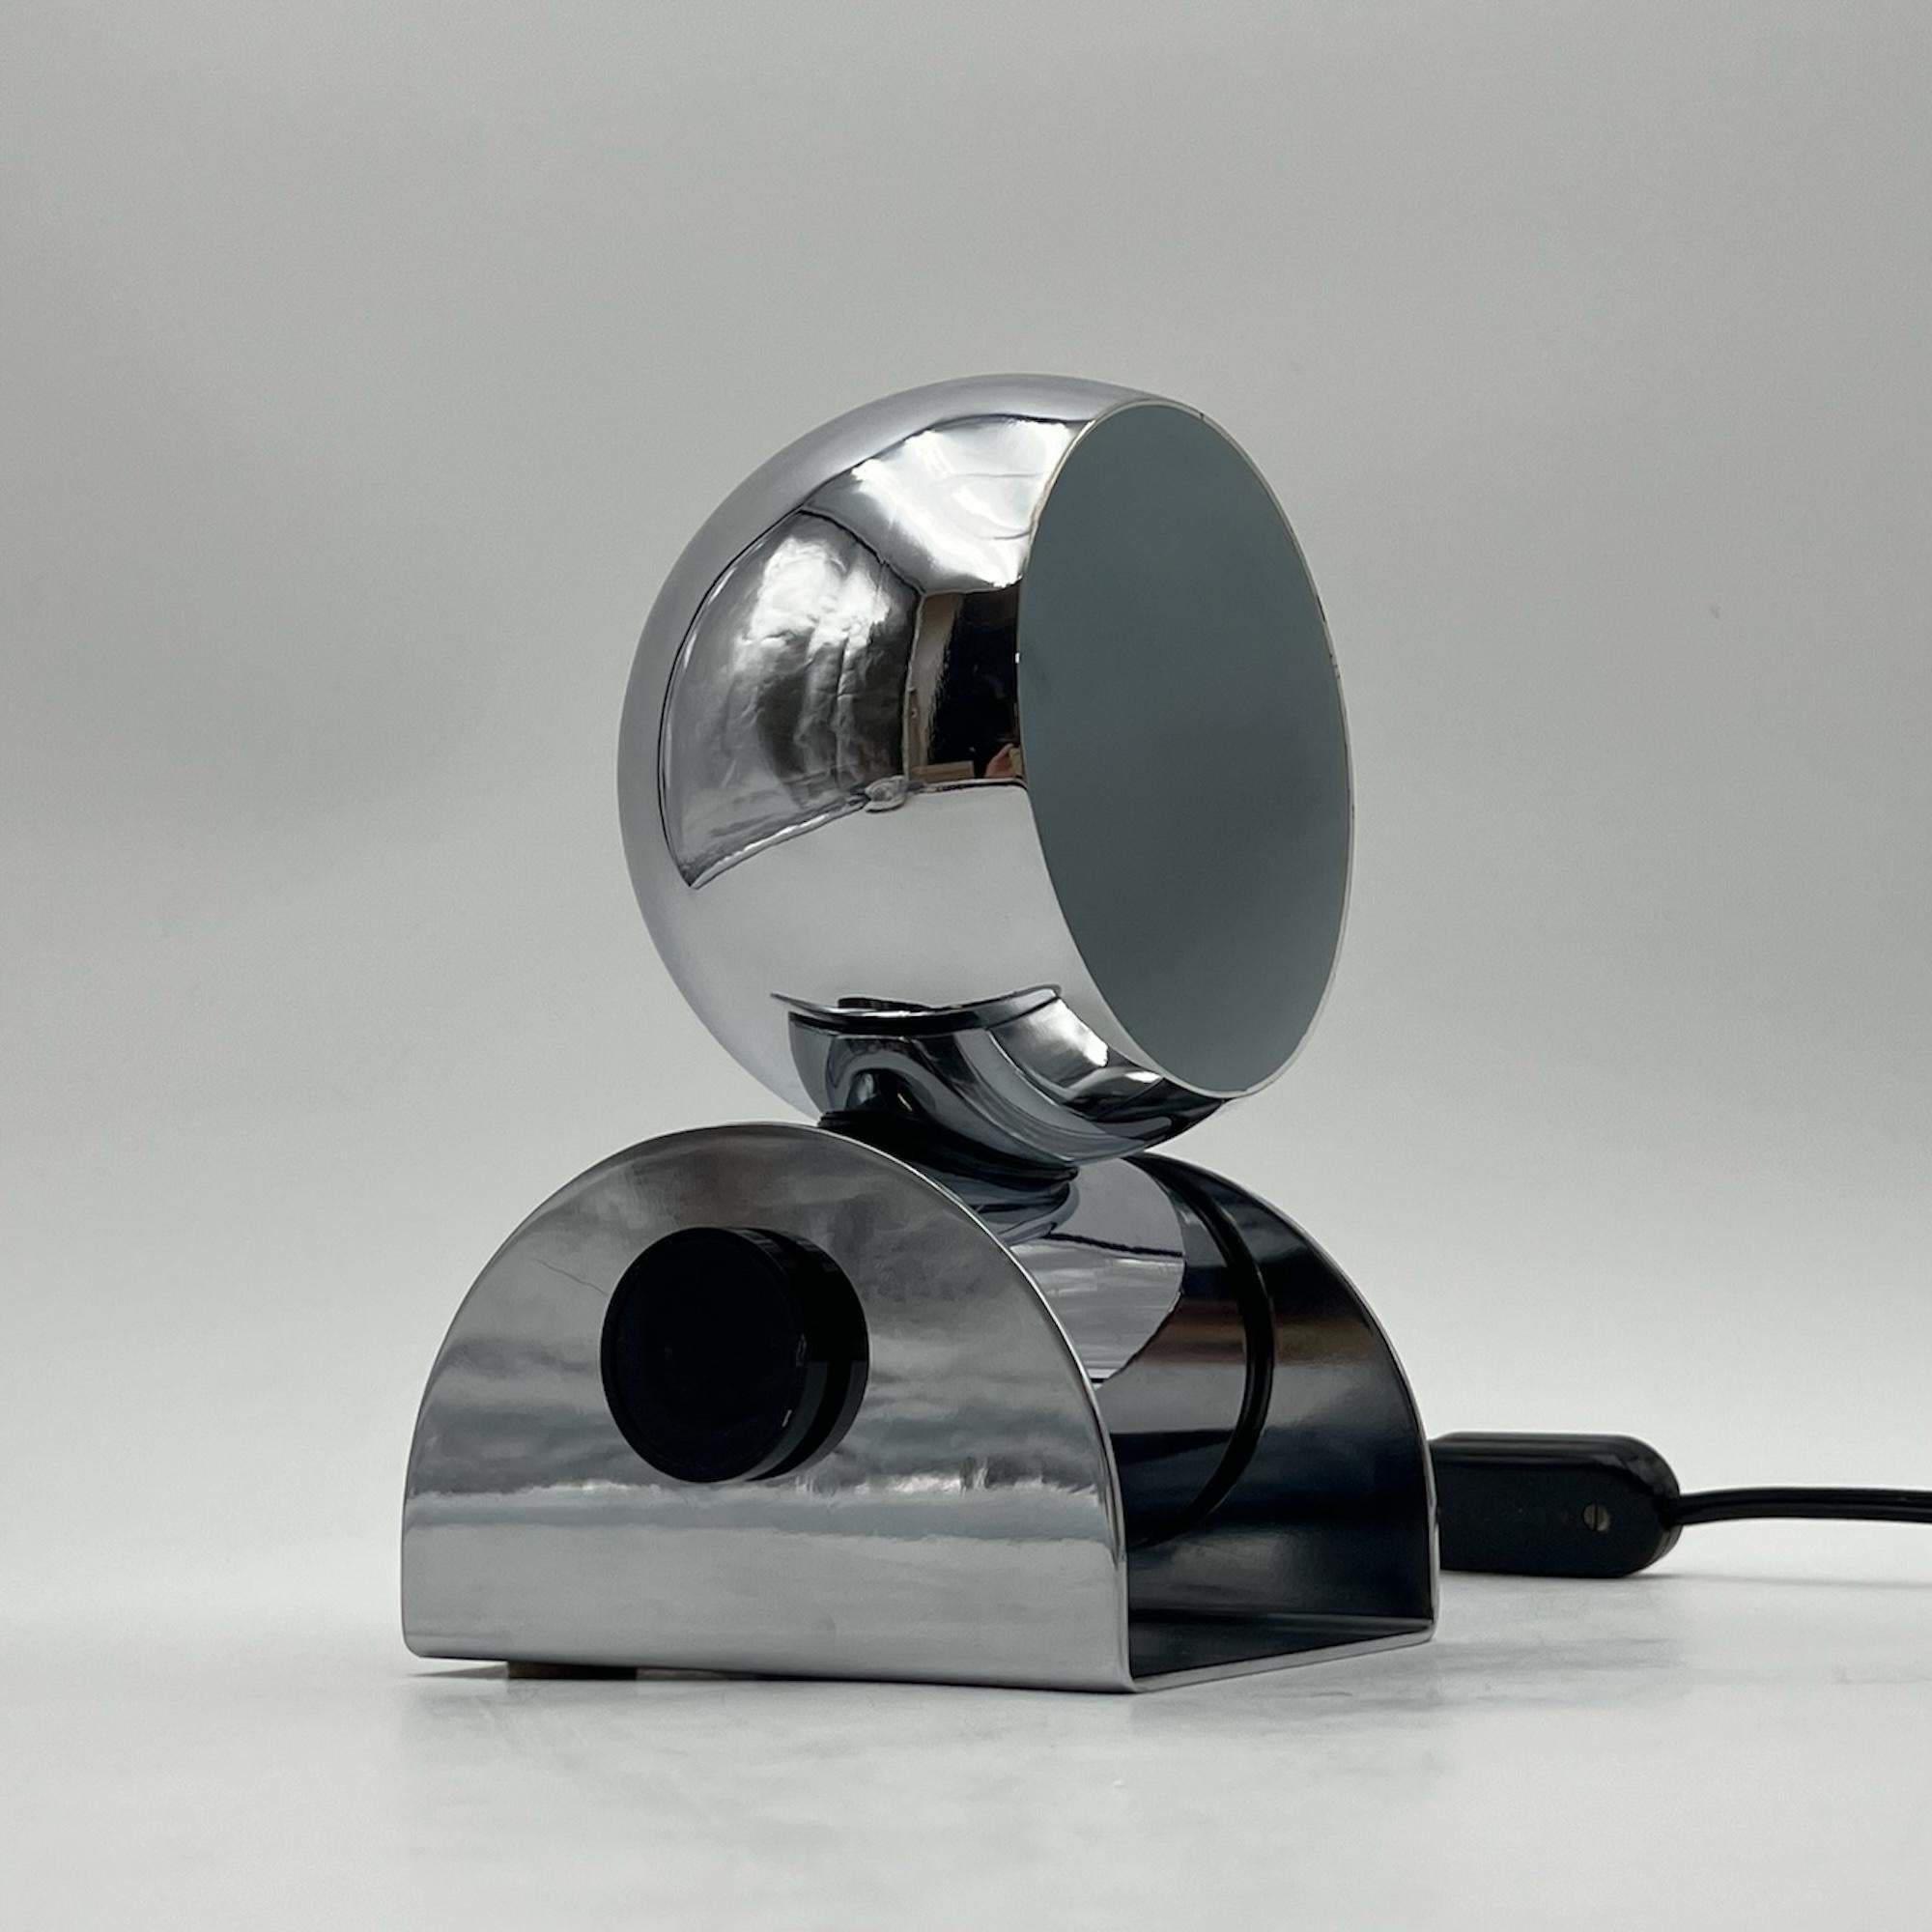 Space Age Eyeball Lamp in Chrome Metal by Tronconi, 1970s For Sale 4